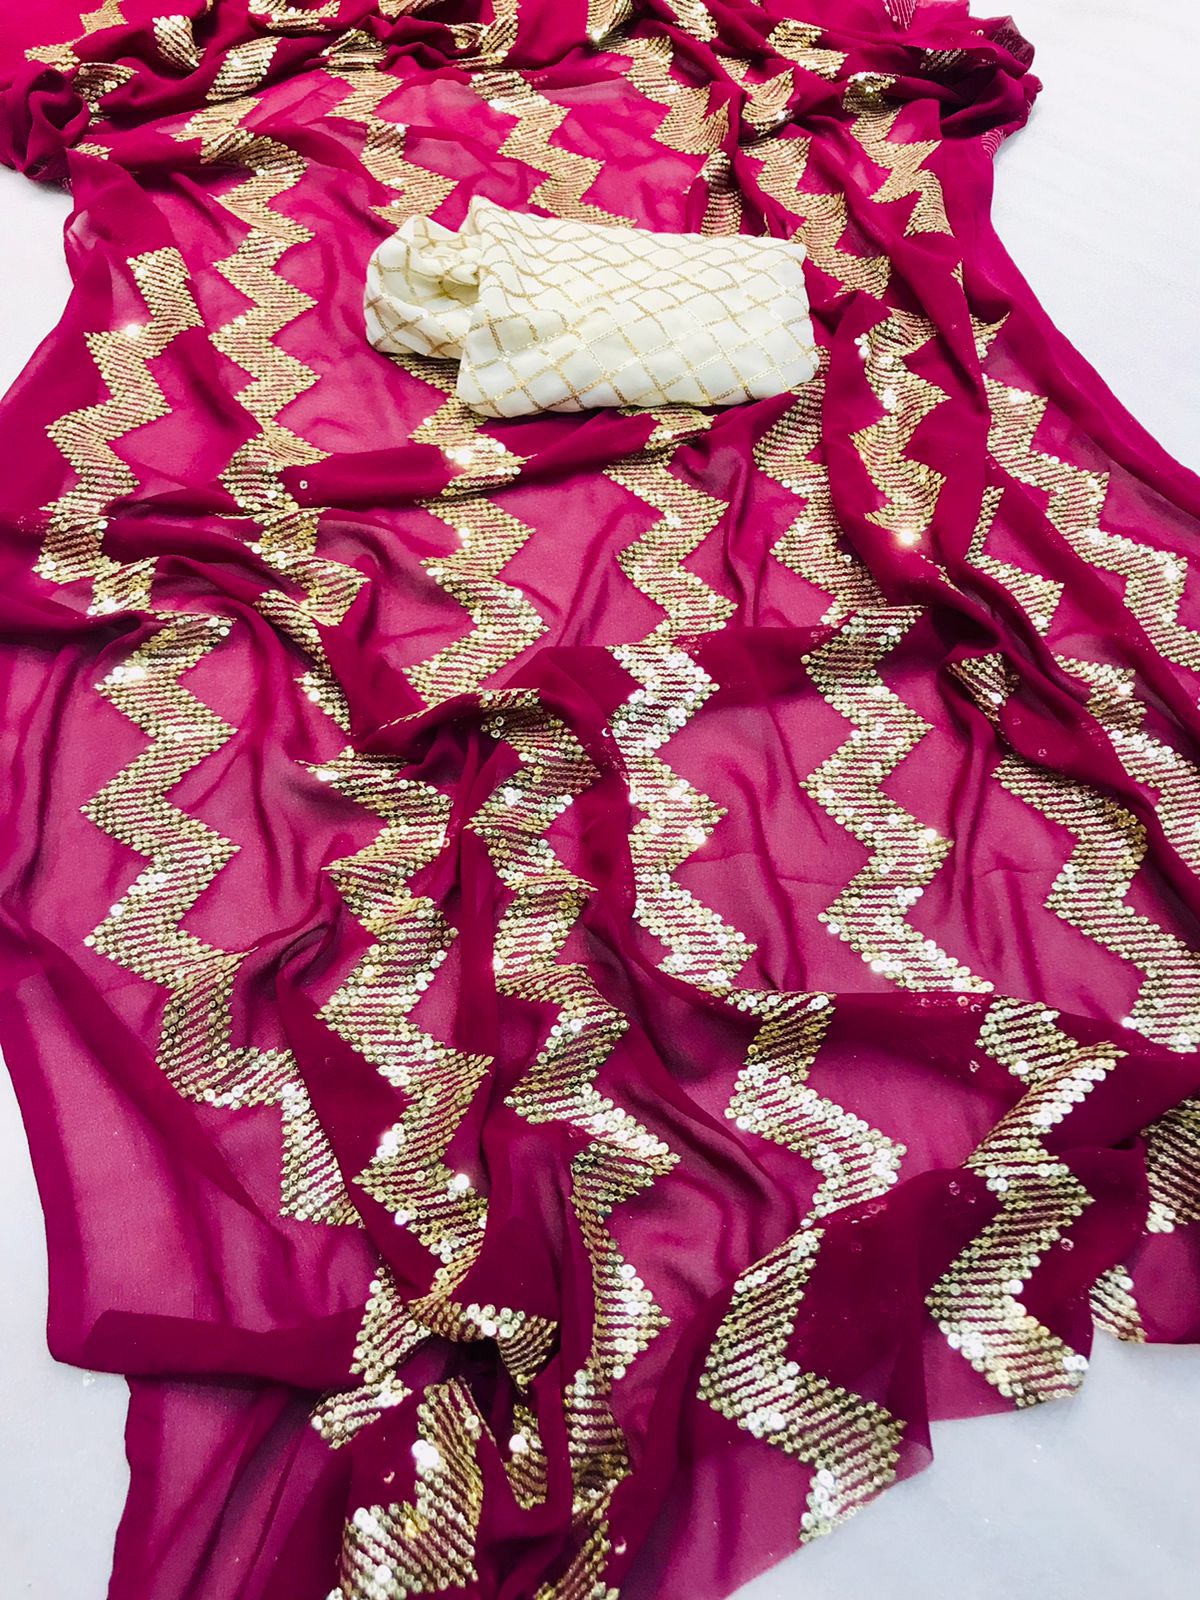 WINE SEQUIN SAREE WITH STITCHED BLOUSE in Ziz zag pattern